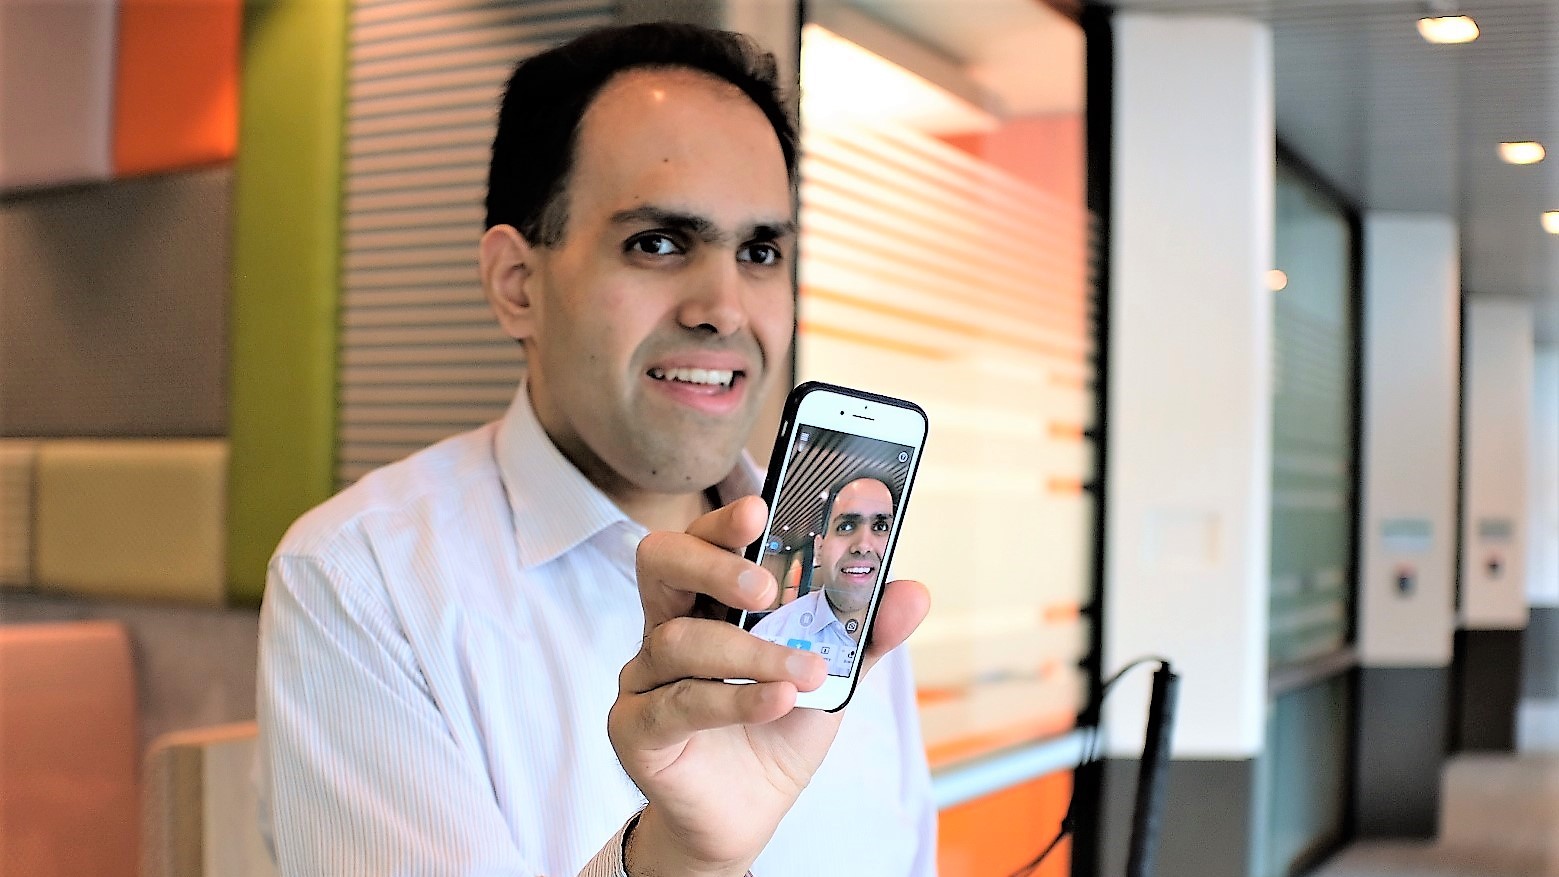 Saquib Shaihk holds up his smartphone with the Seeing Ai app activated.